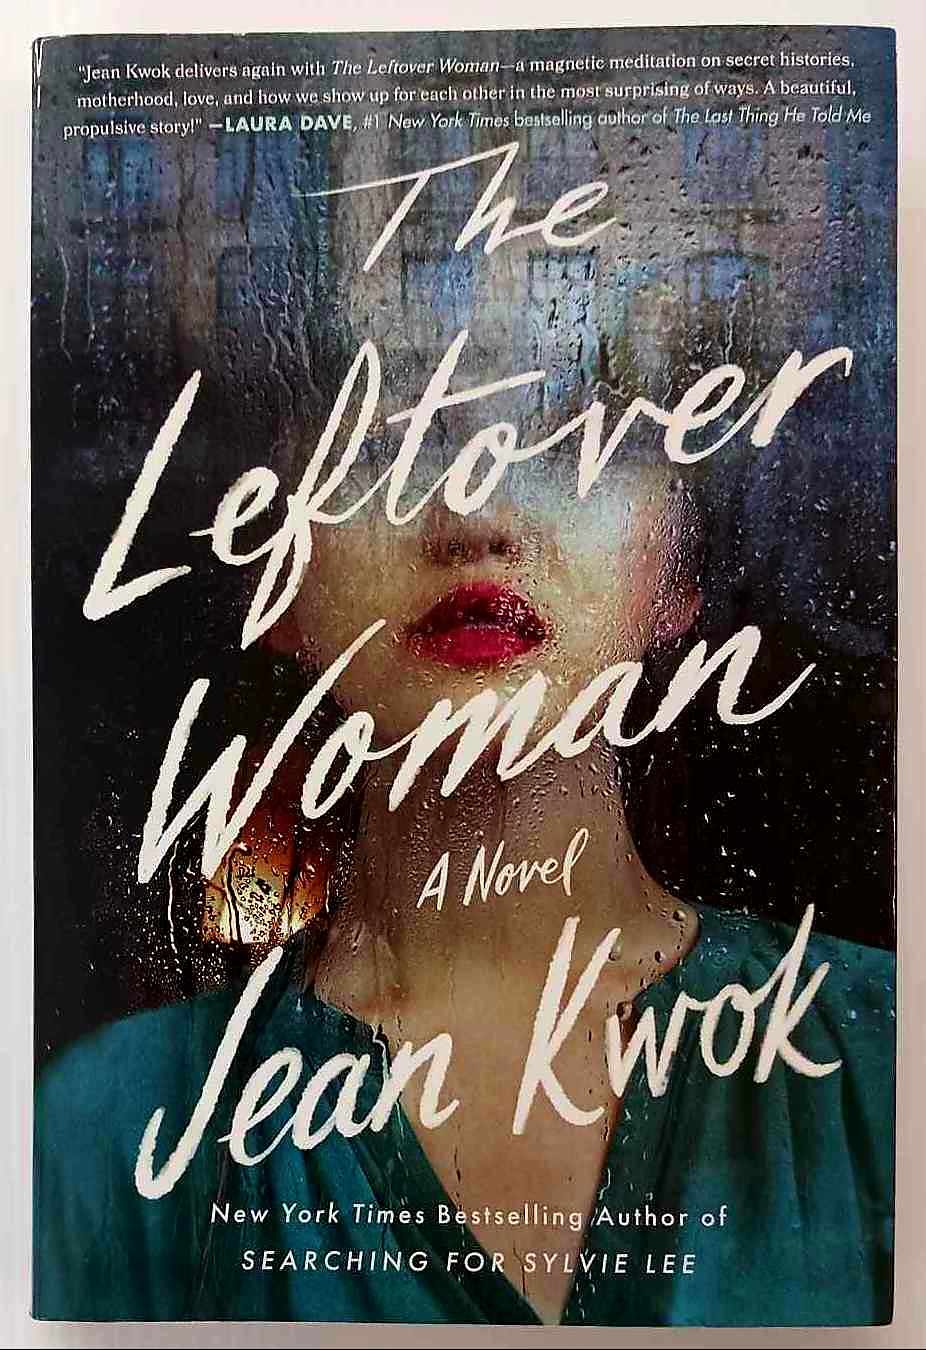 THE LEFTOVER WOMAN - Jean Kwok